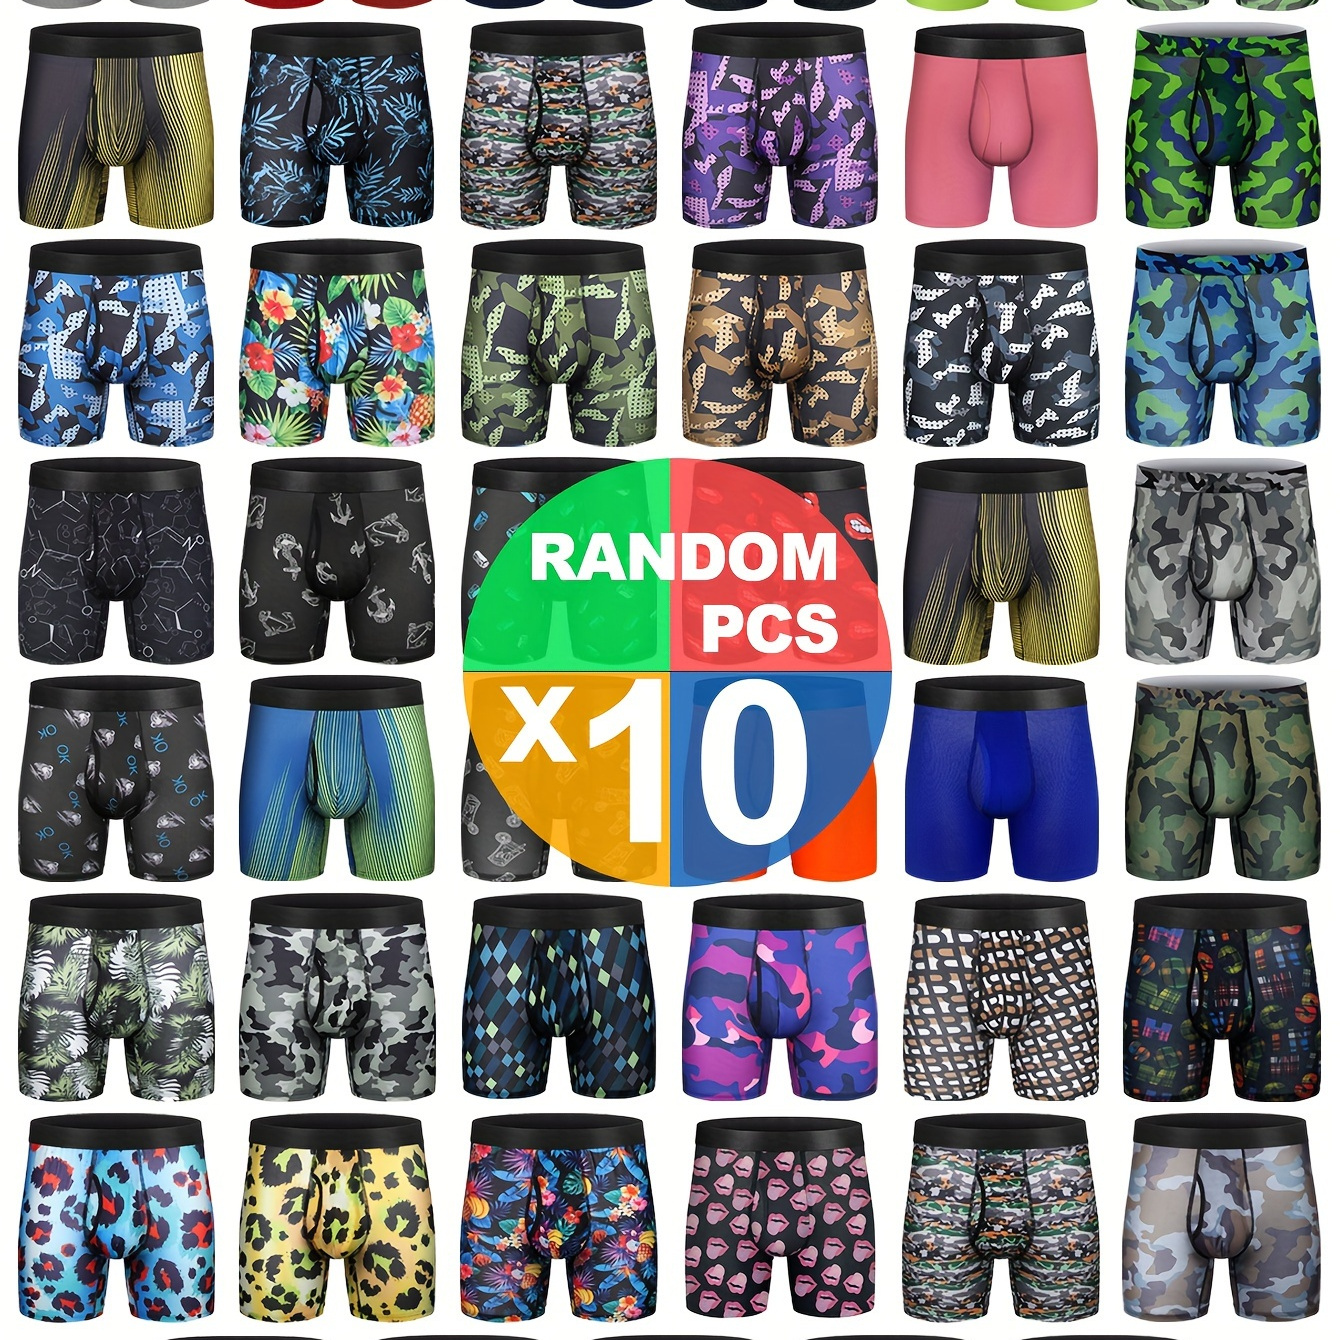 

10pcs Random Set Men's Long Boxers Briefs Shorts, Breathable Comfy Stretchy Quick Drying Sports Boxers Trunks, Men's Novelty Graphic Underwear